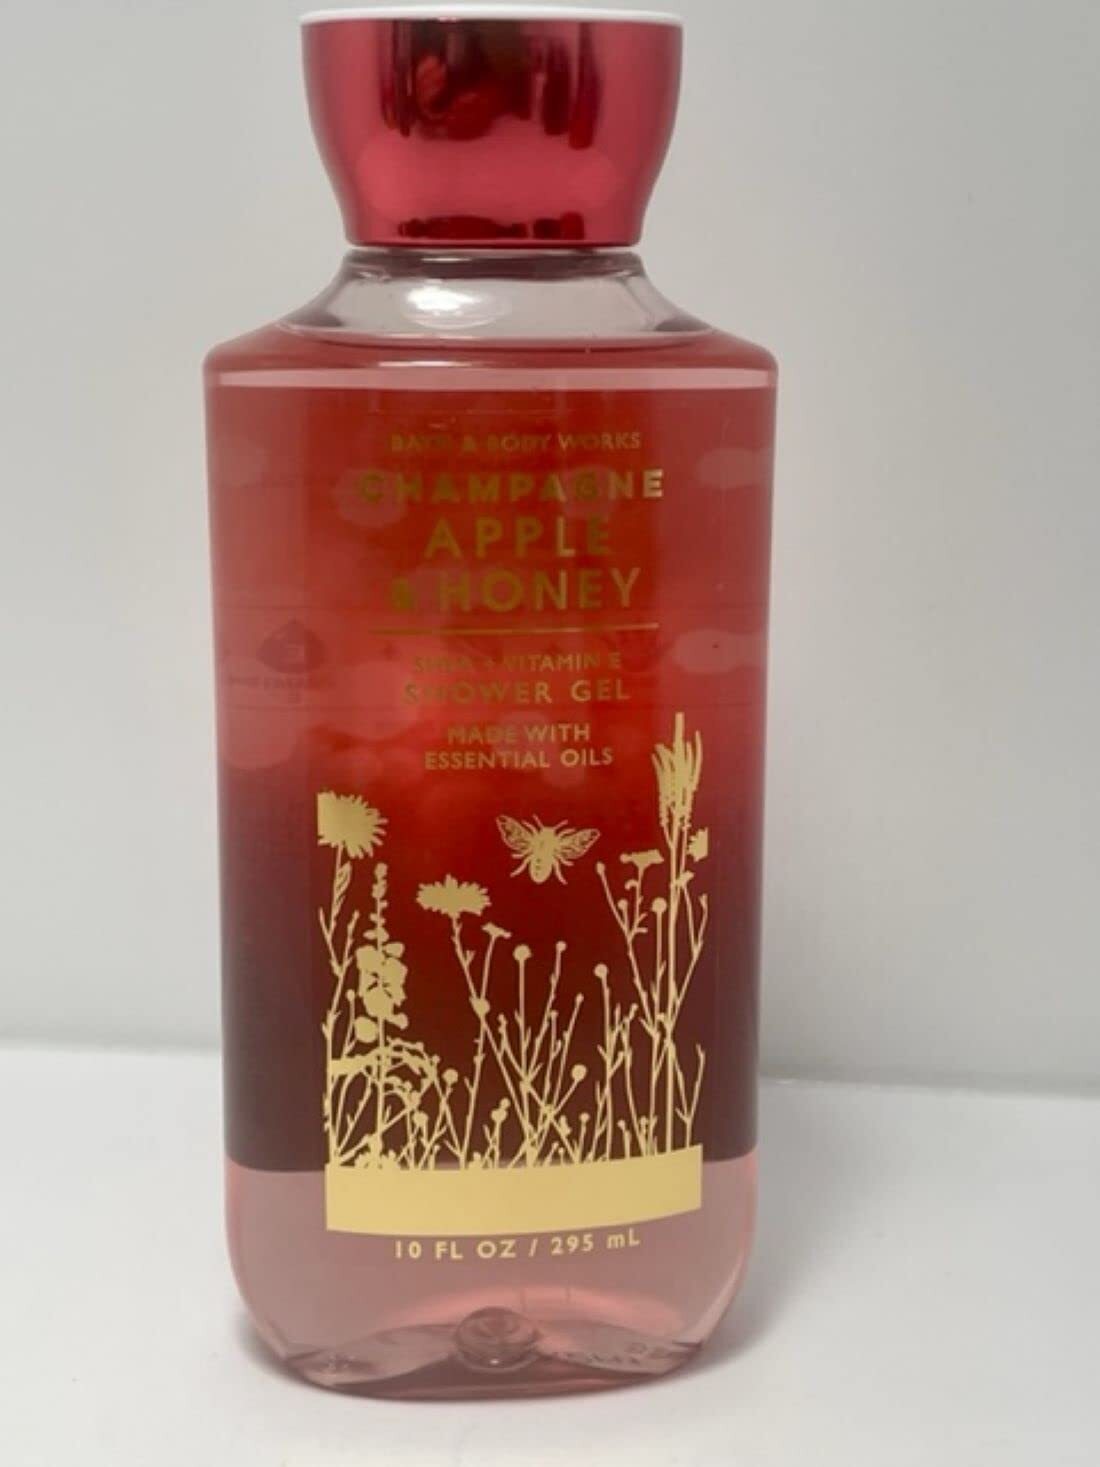 Bath and Body Works Champagne Apple Honey Shower Gel 10 Ounce Full Size